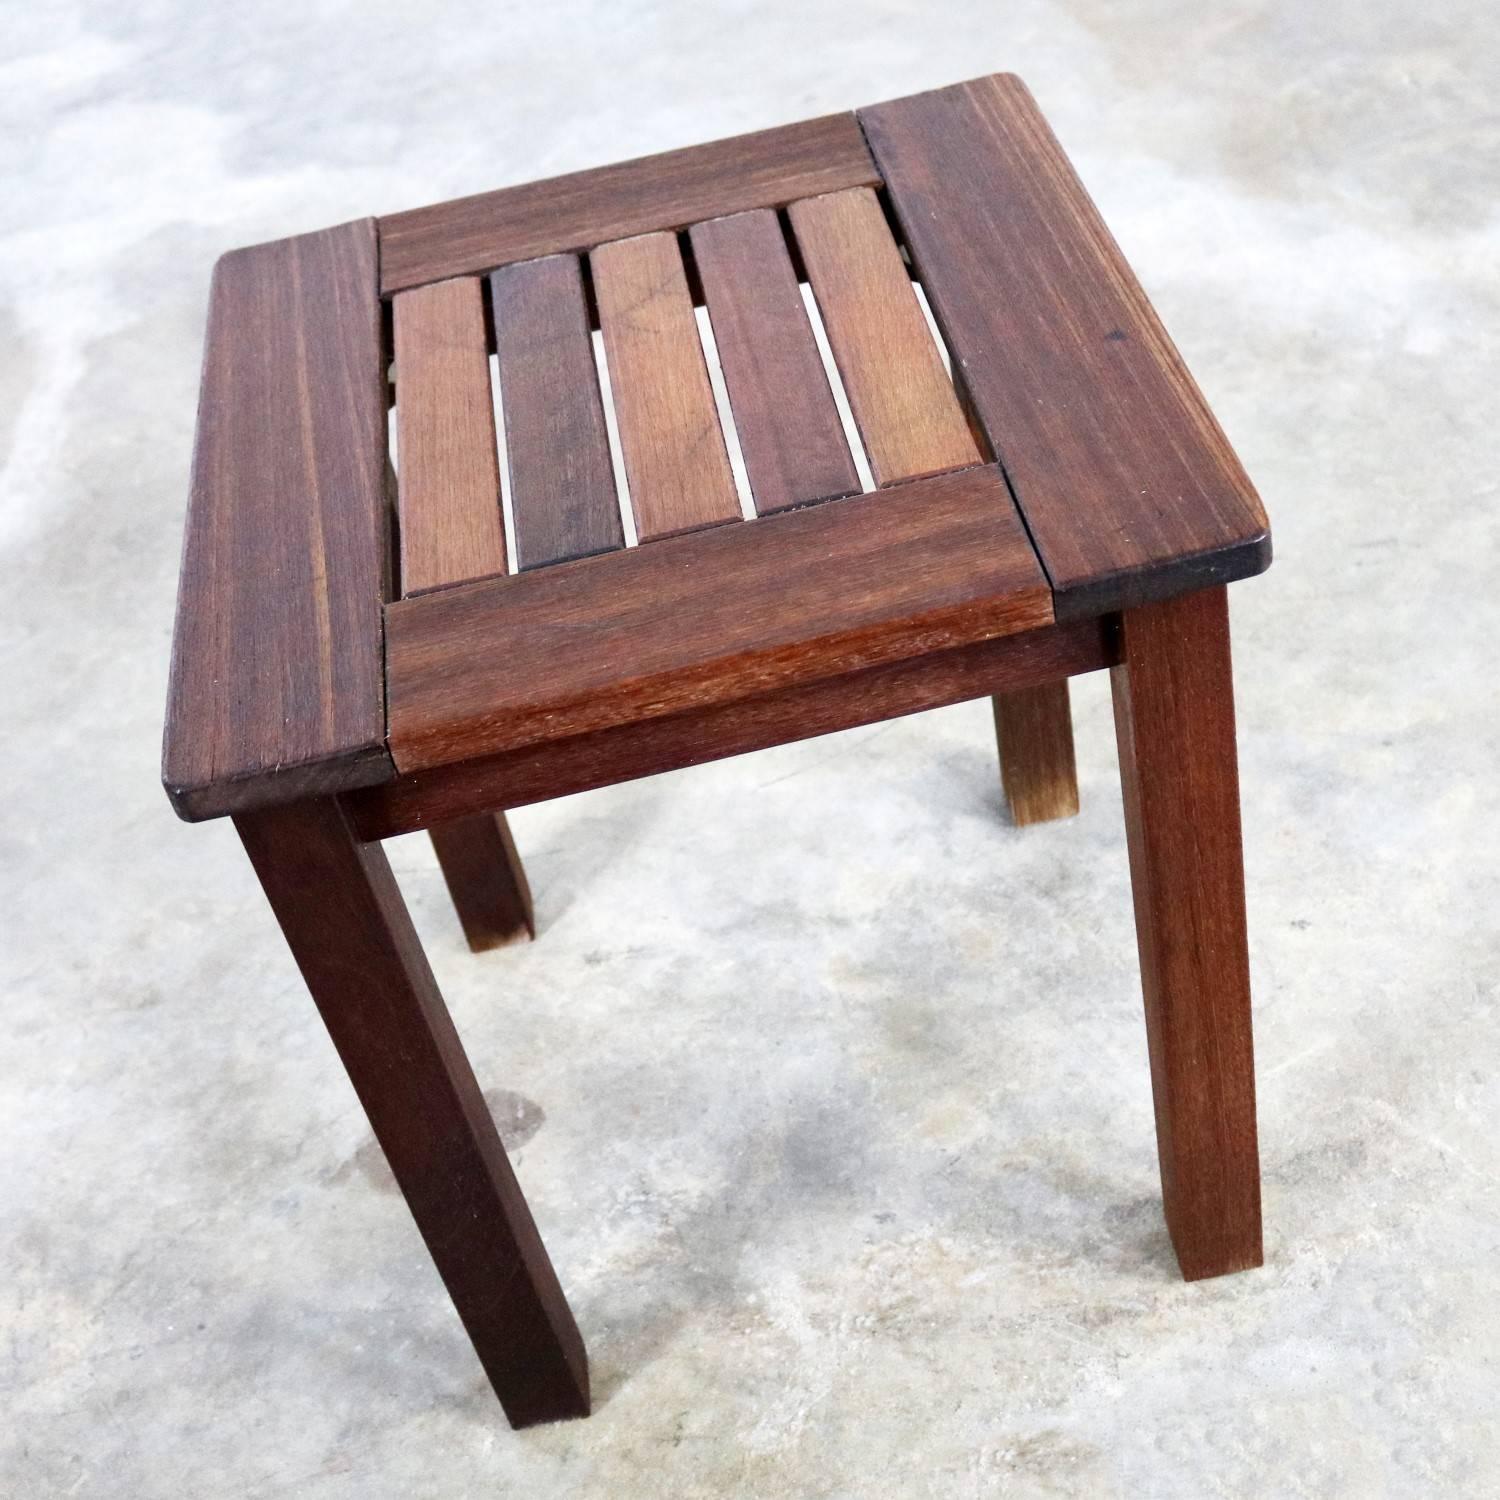 Handsome natural teak vintage windsor outdoor patio or deck side table. We have a total of 5 and are pricing them per table. These tables are in wonderful sturdy condition with the natural age patina of teak that has spent some time outside but